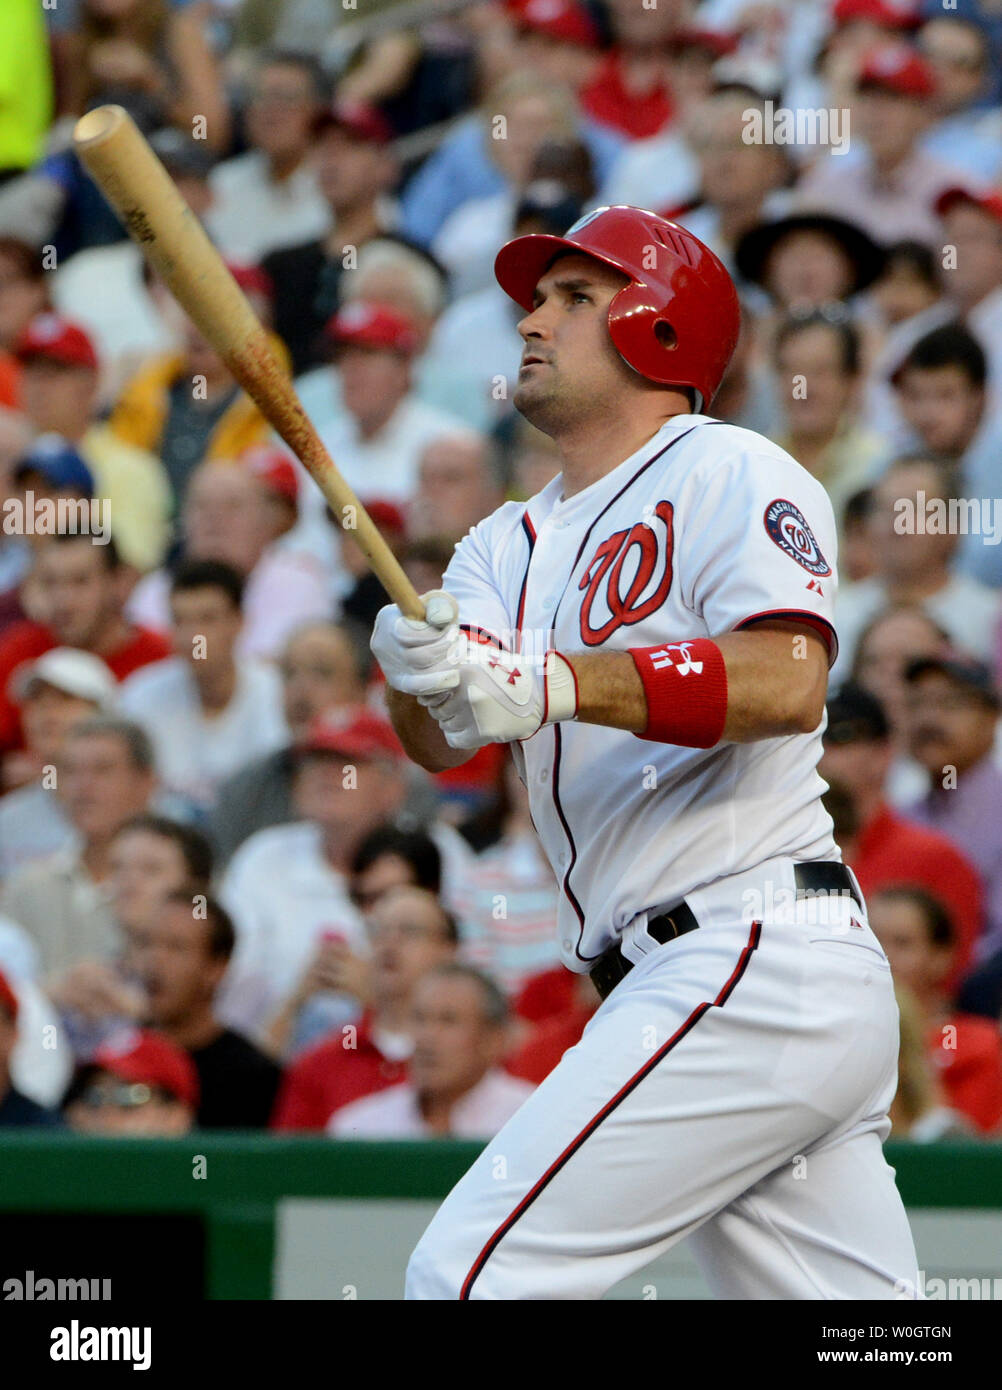 Washington Nationals Ryan Zimmerman hits a long fly out to left in the thrid inning of game against the New York Yankees at Nationals Park in Washington, DC on June 15, 2012.   UPI/Pat Benic Stock Photo